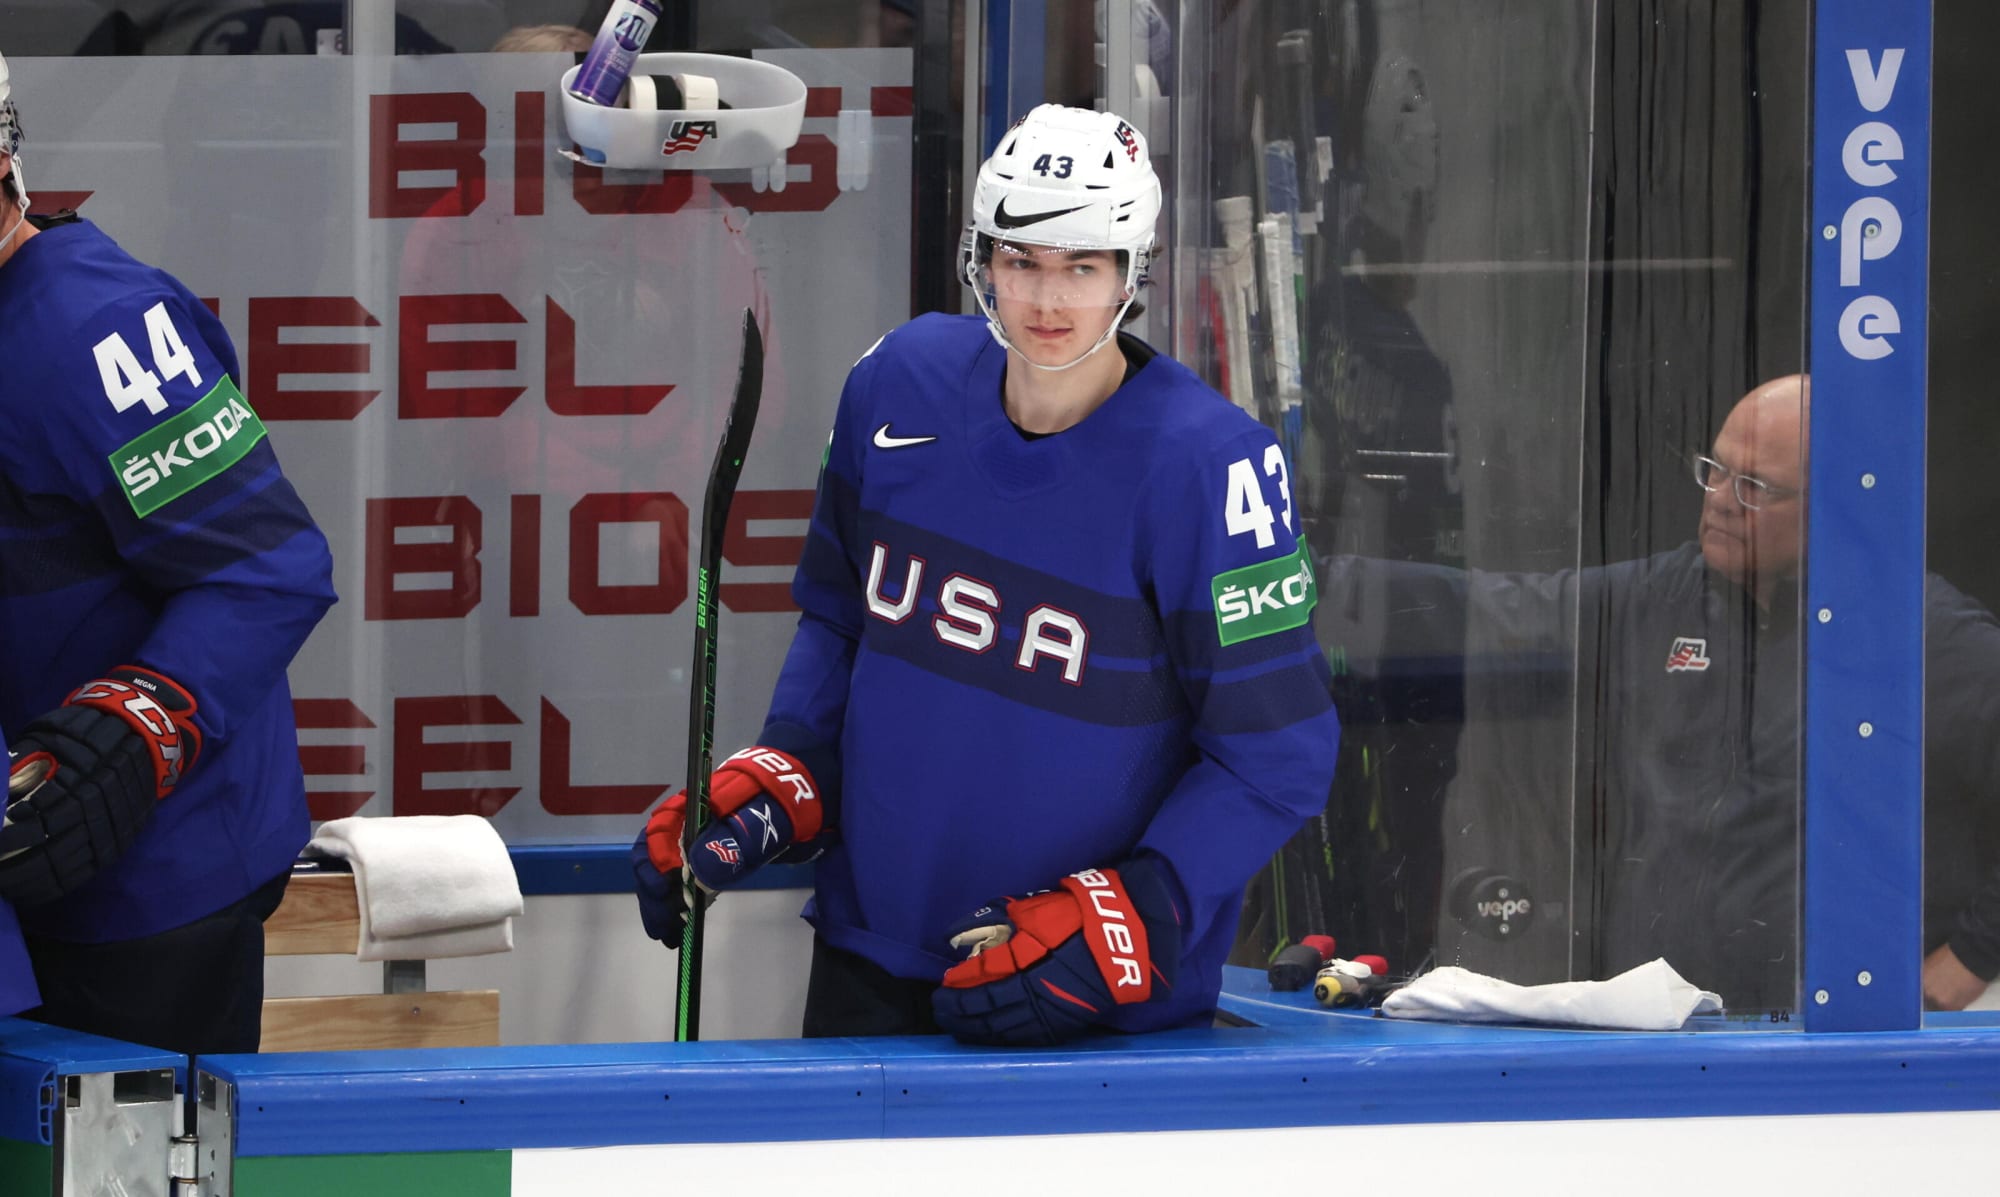 Luke Hughes talks Signing With New Jersey Devils, Playing With Jack Hughes  & Career at Michigan 